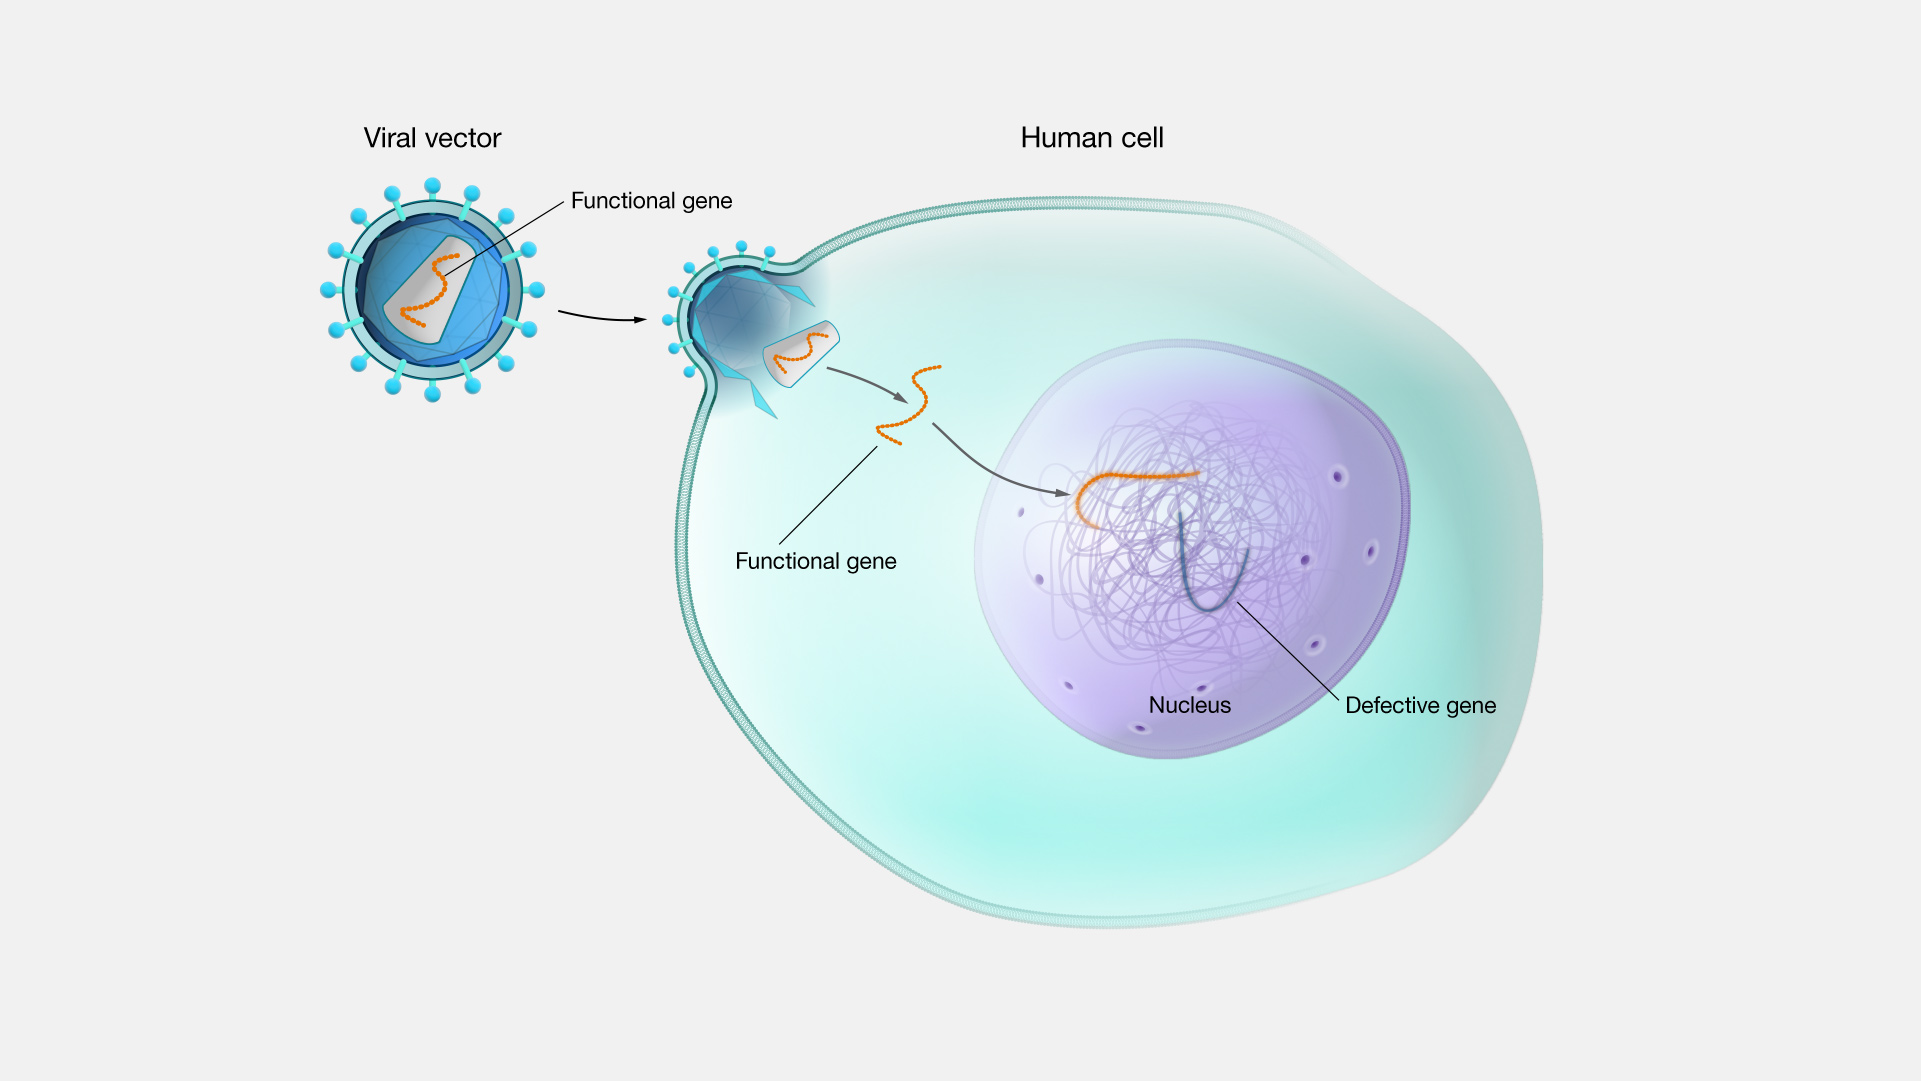 This image illustrates the concept of gene therapy